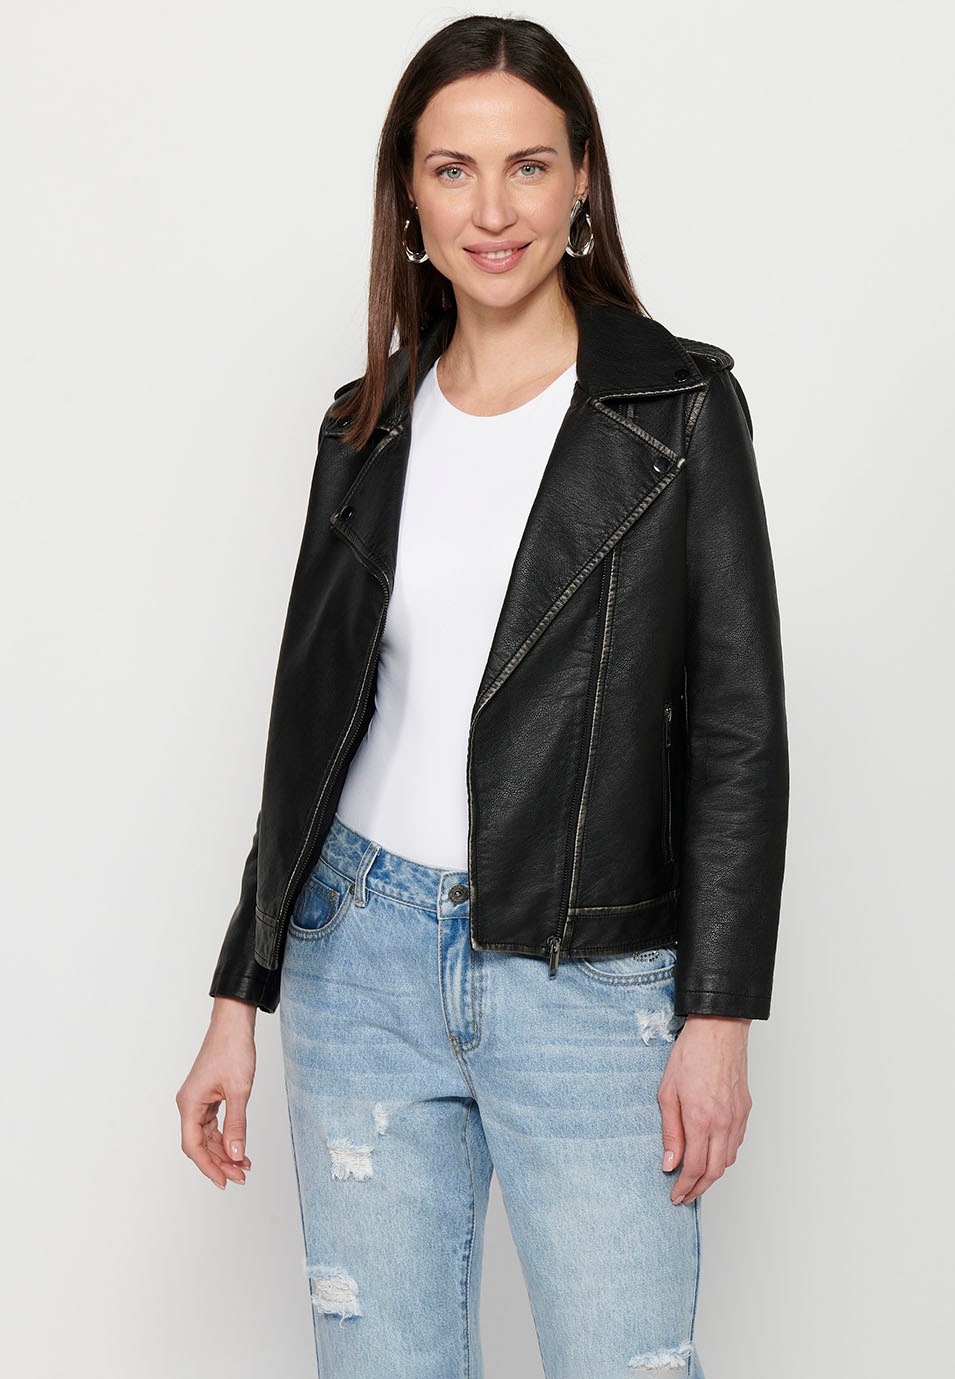 Leather-effect double-breasted jacket with lapel collar and front zipper closure in Black for Women 7